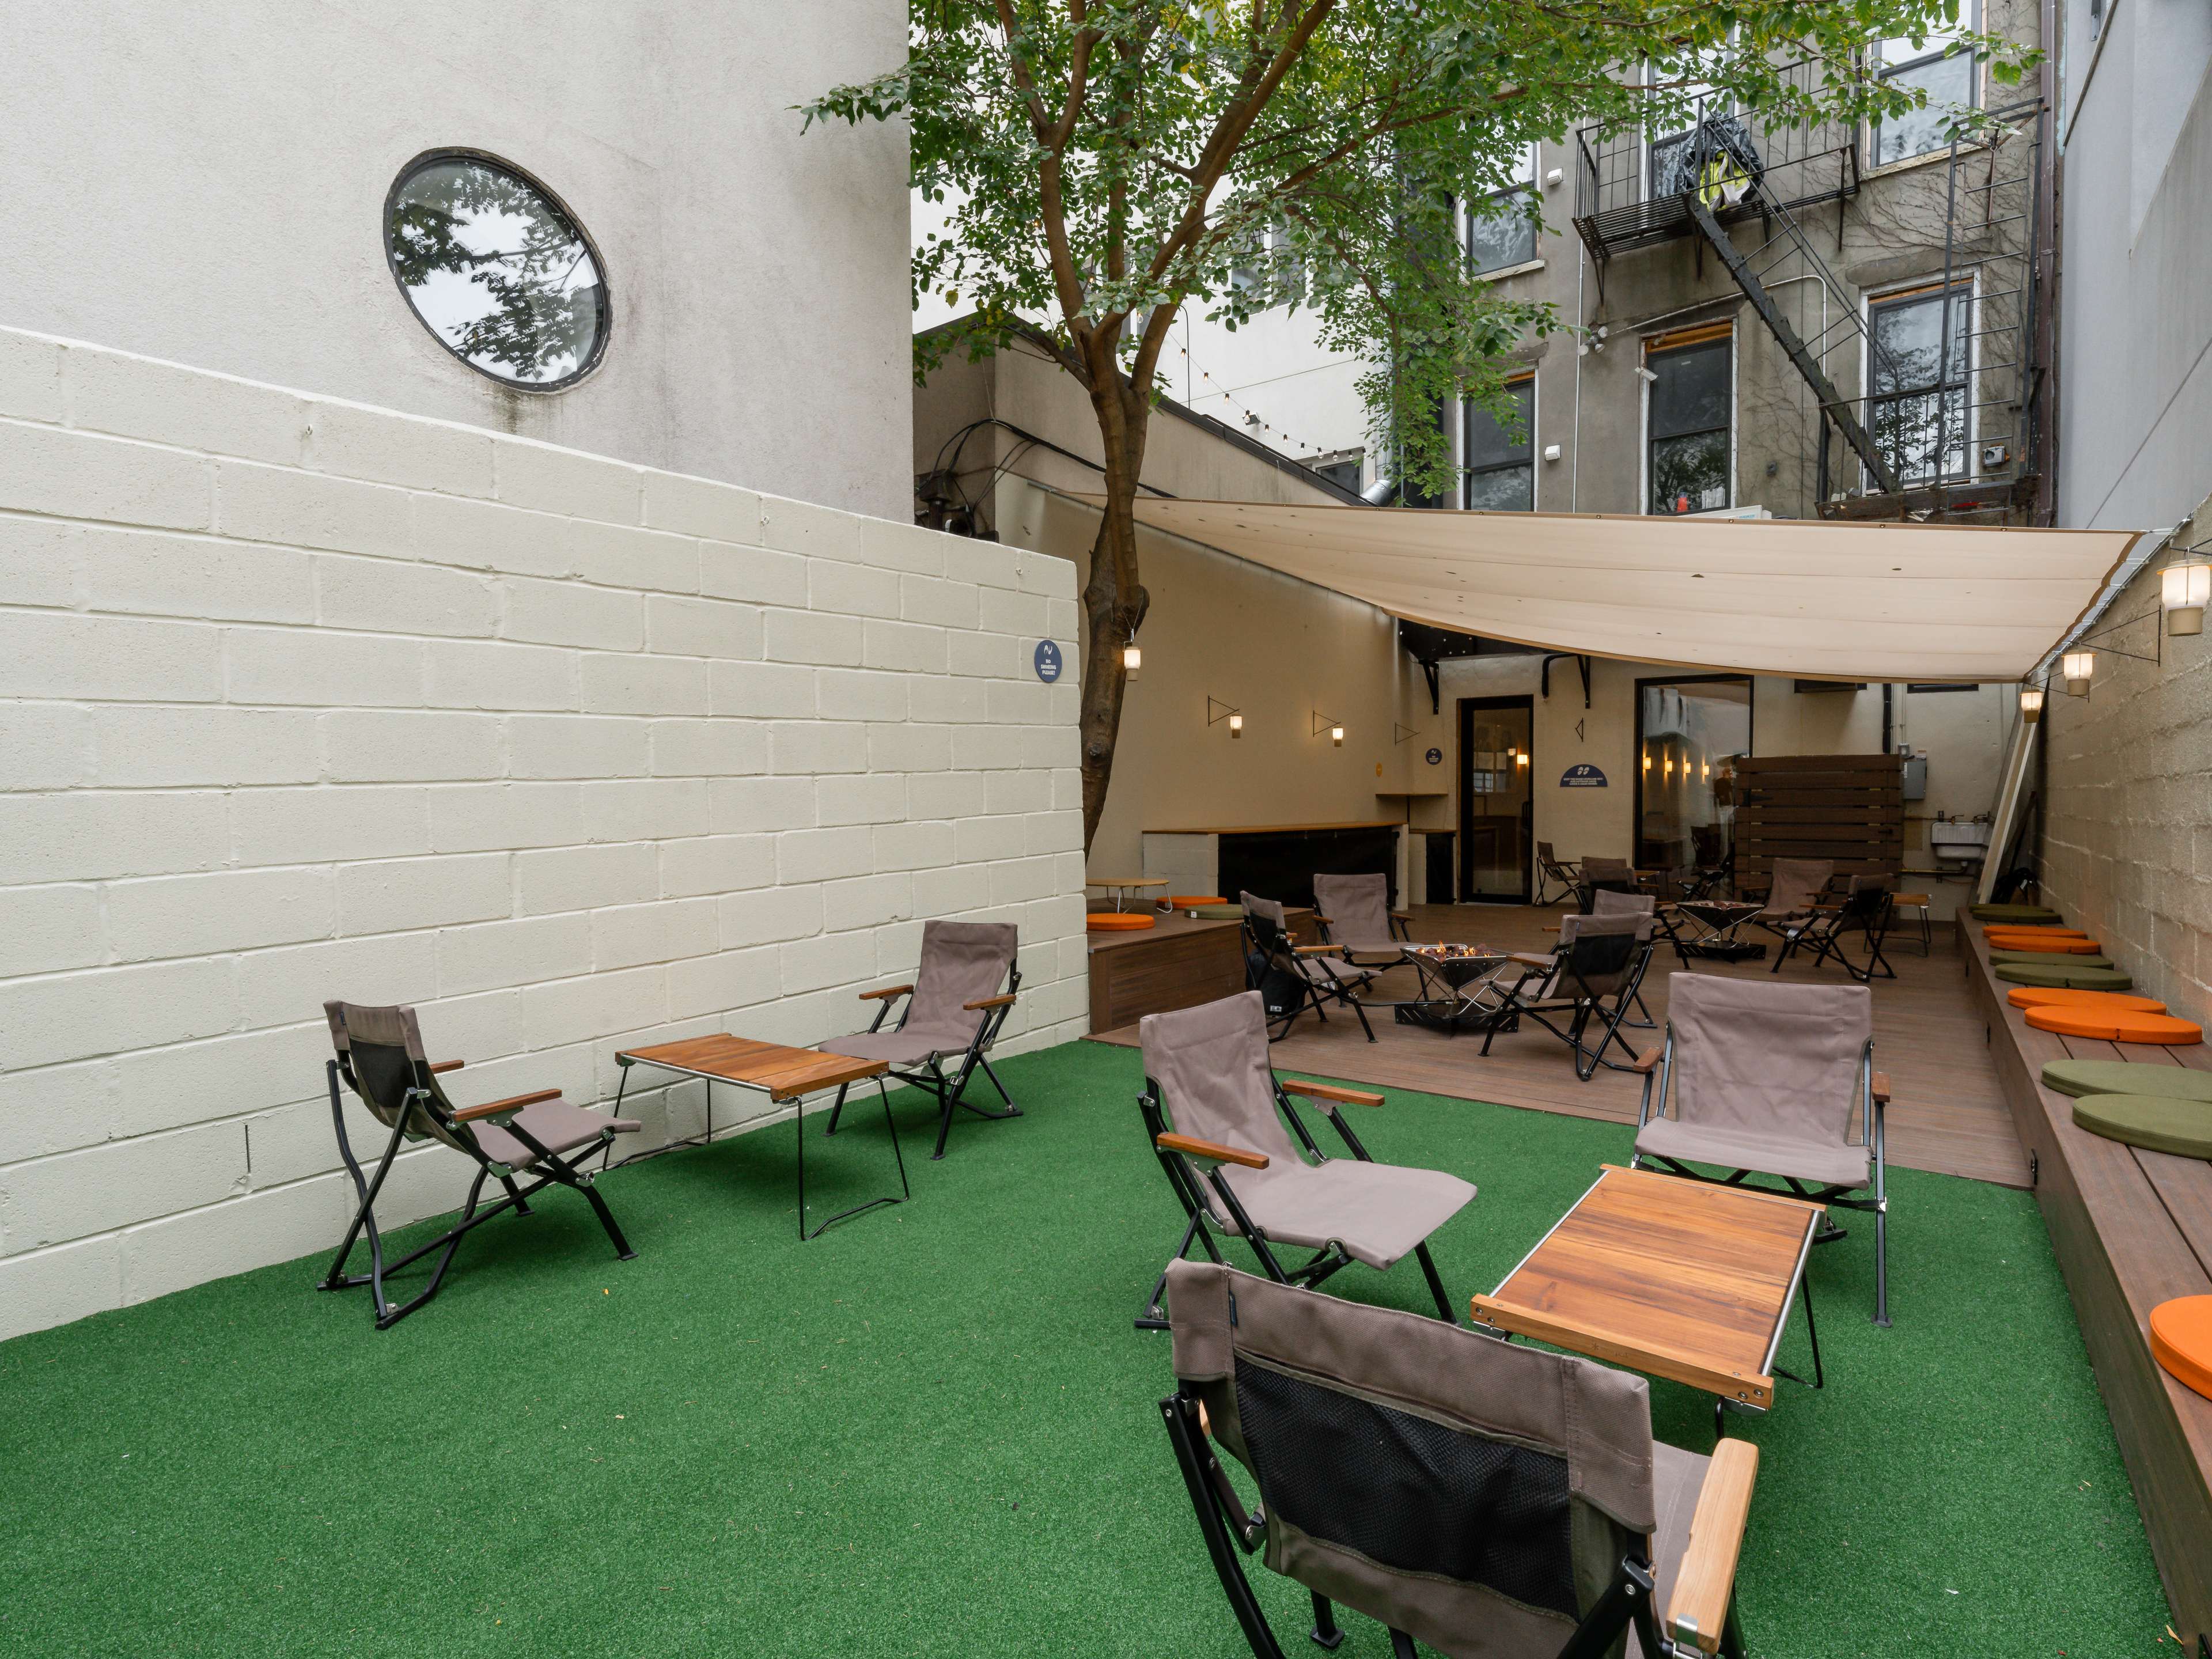 the backyard at taku sando with tables, chairs, and a canopy